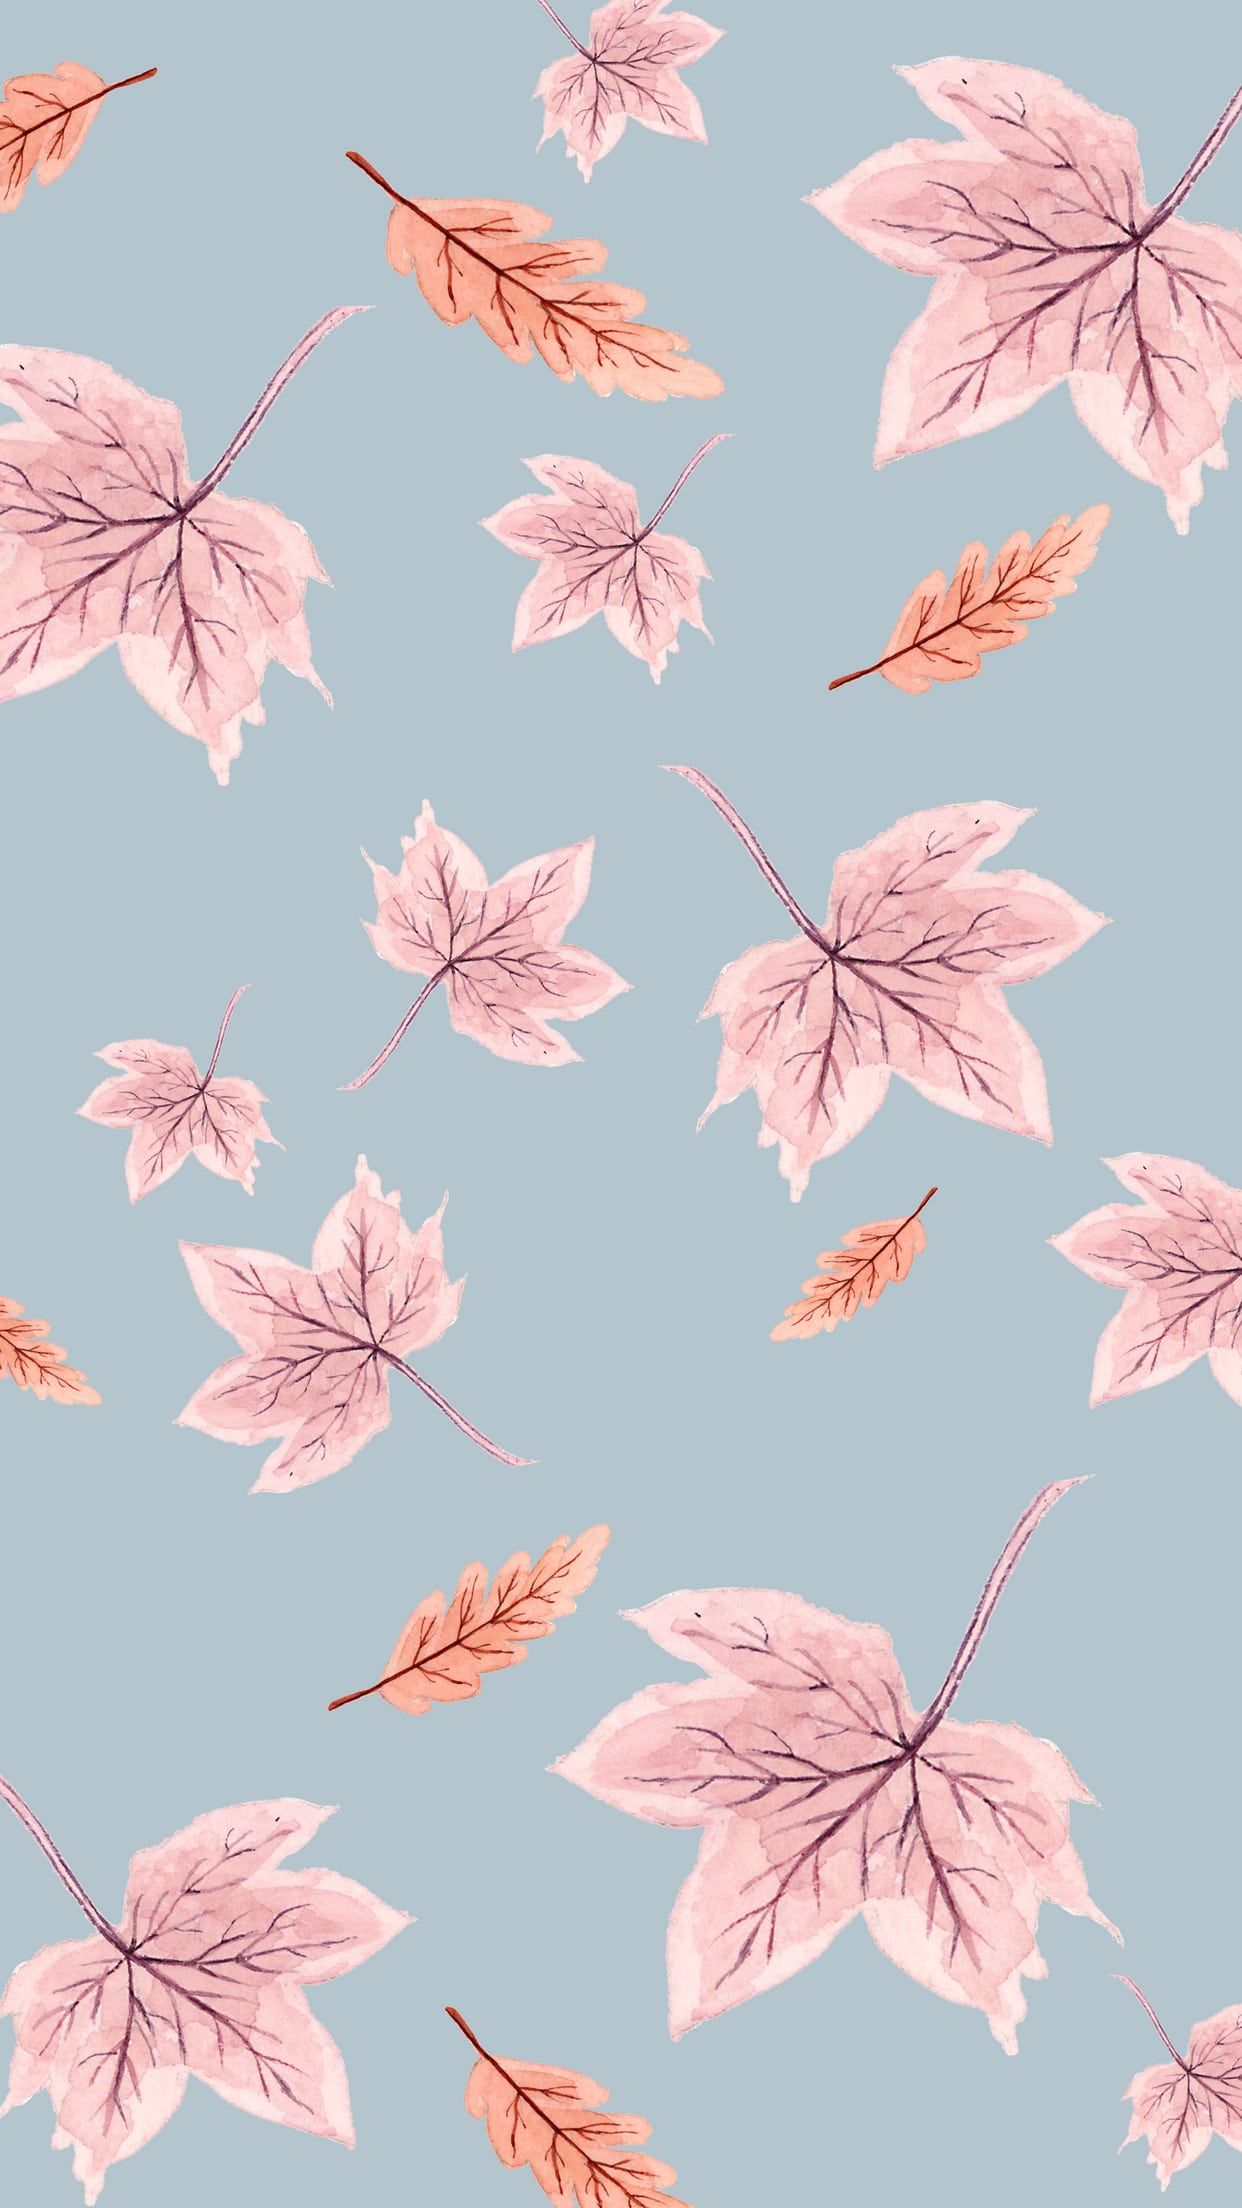 Iphone wallpaper autumn leaves, pink and orange leaves on a blue background - Leaves, cute fall, fall iPhone